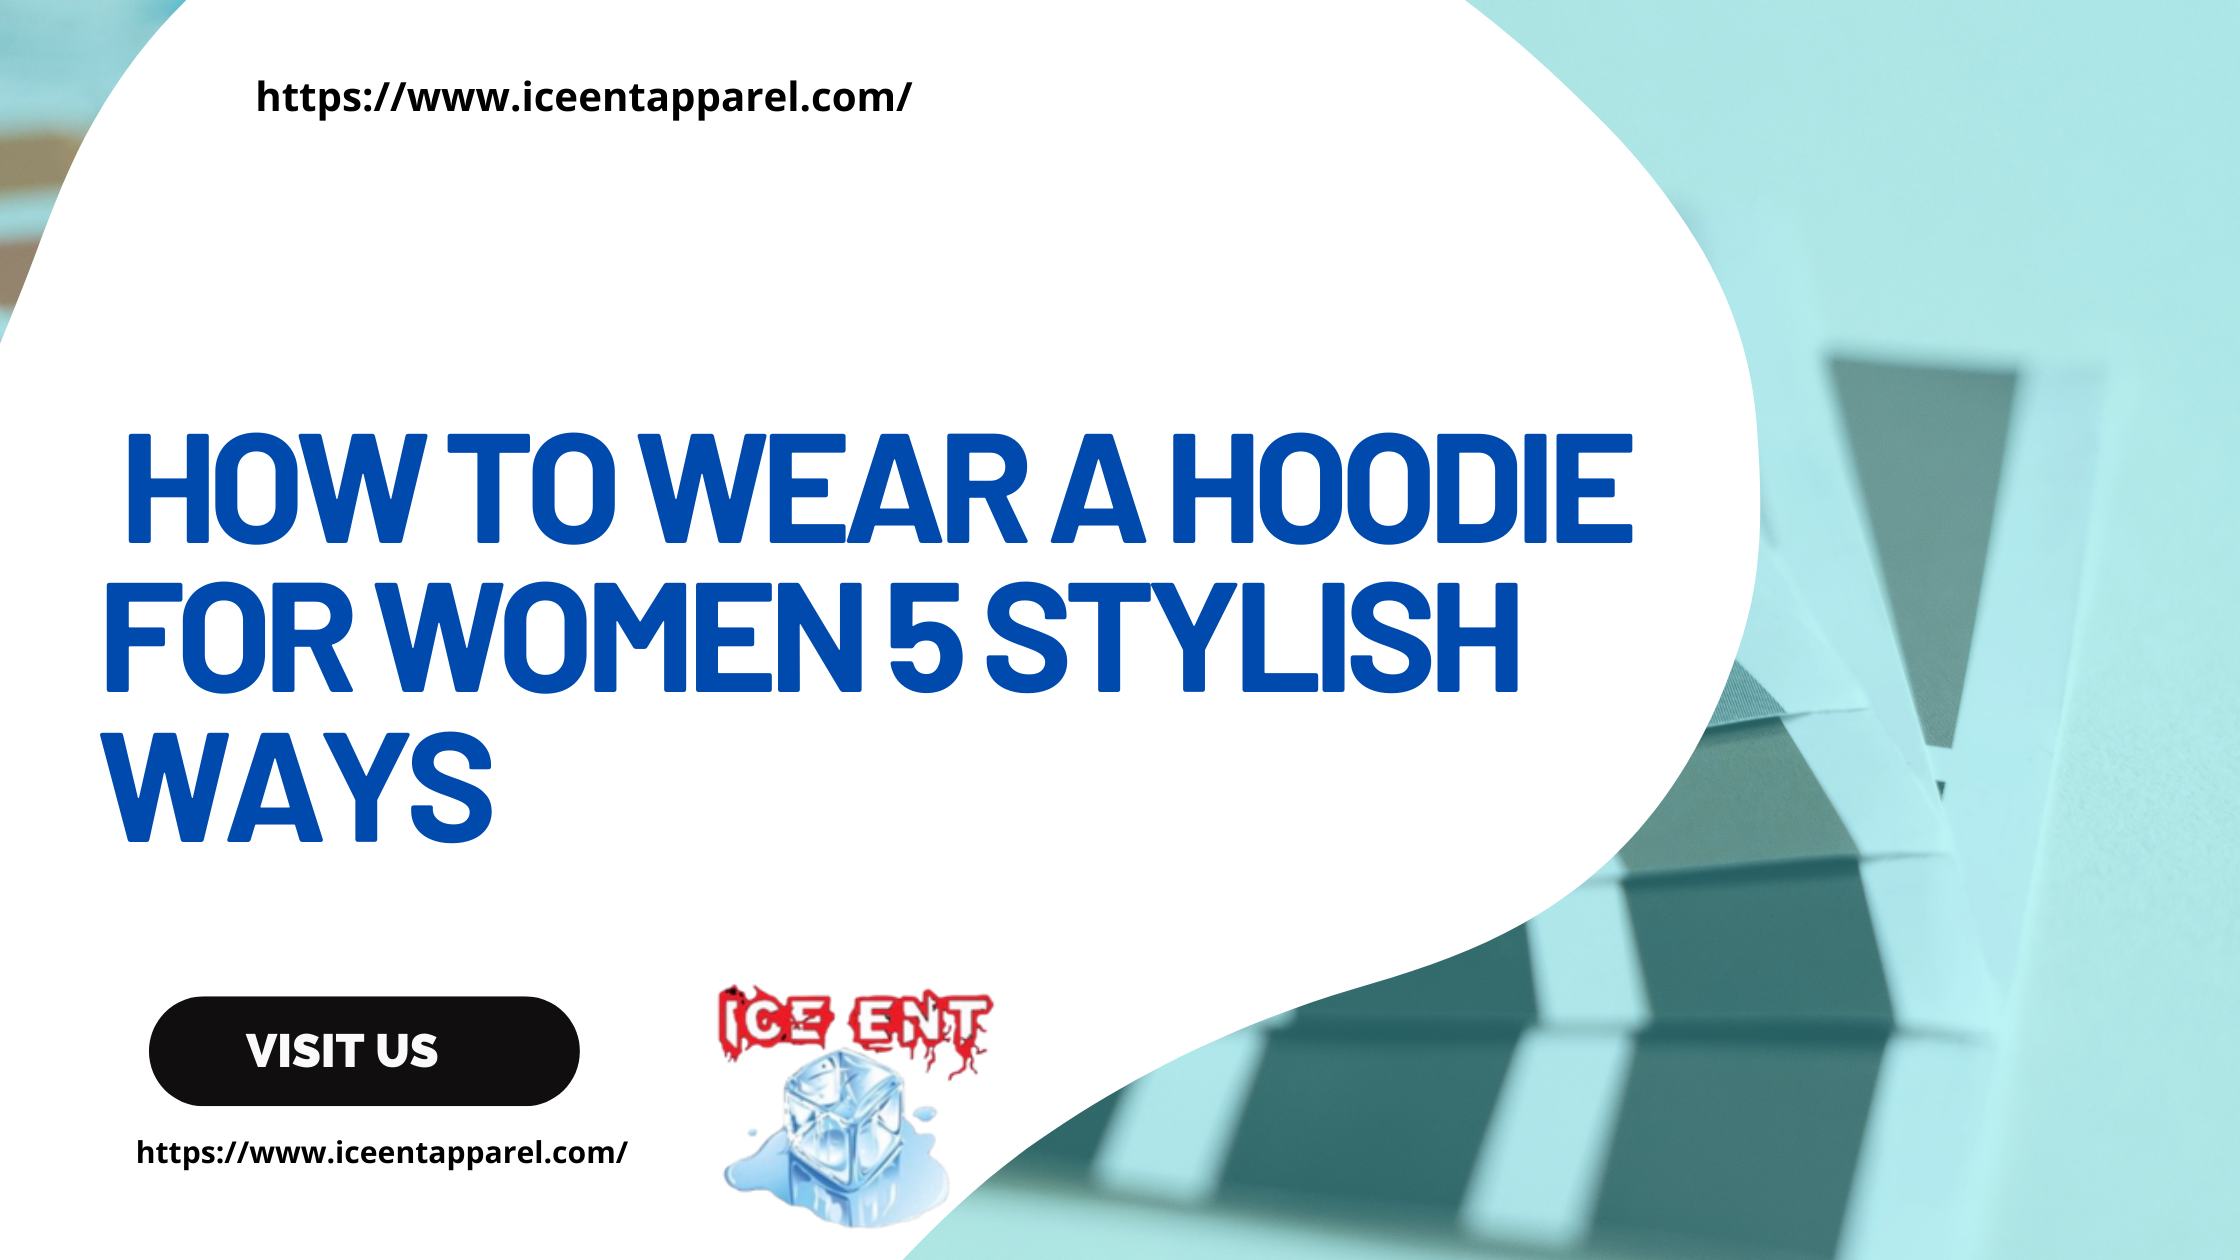 HOW TO WEAR A HOODIE FOR WOMEN 5 STYLISH WAYS